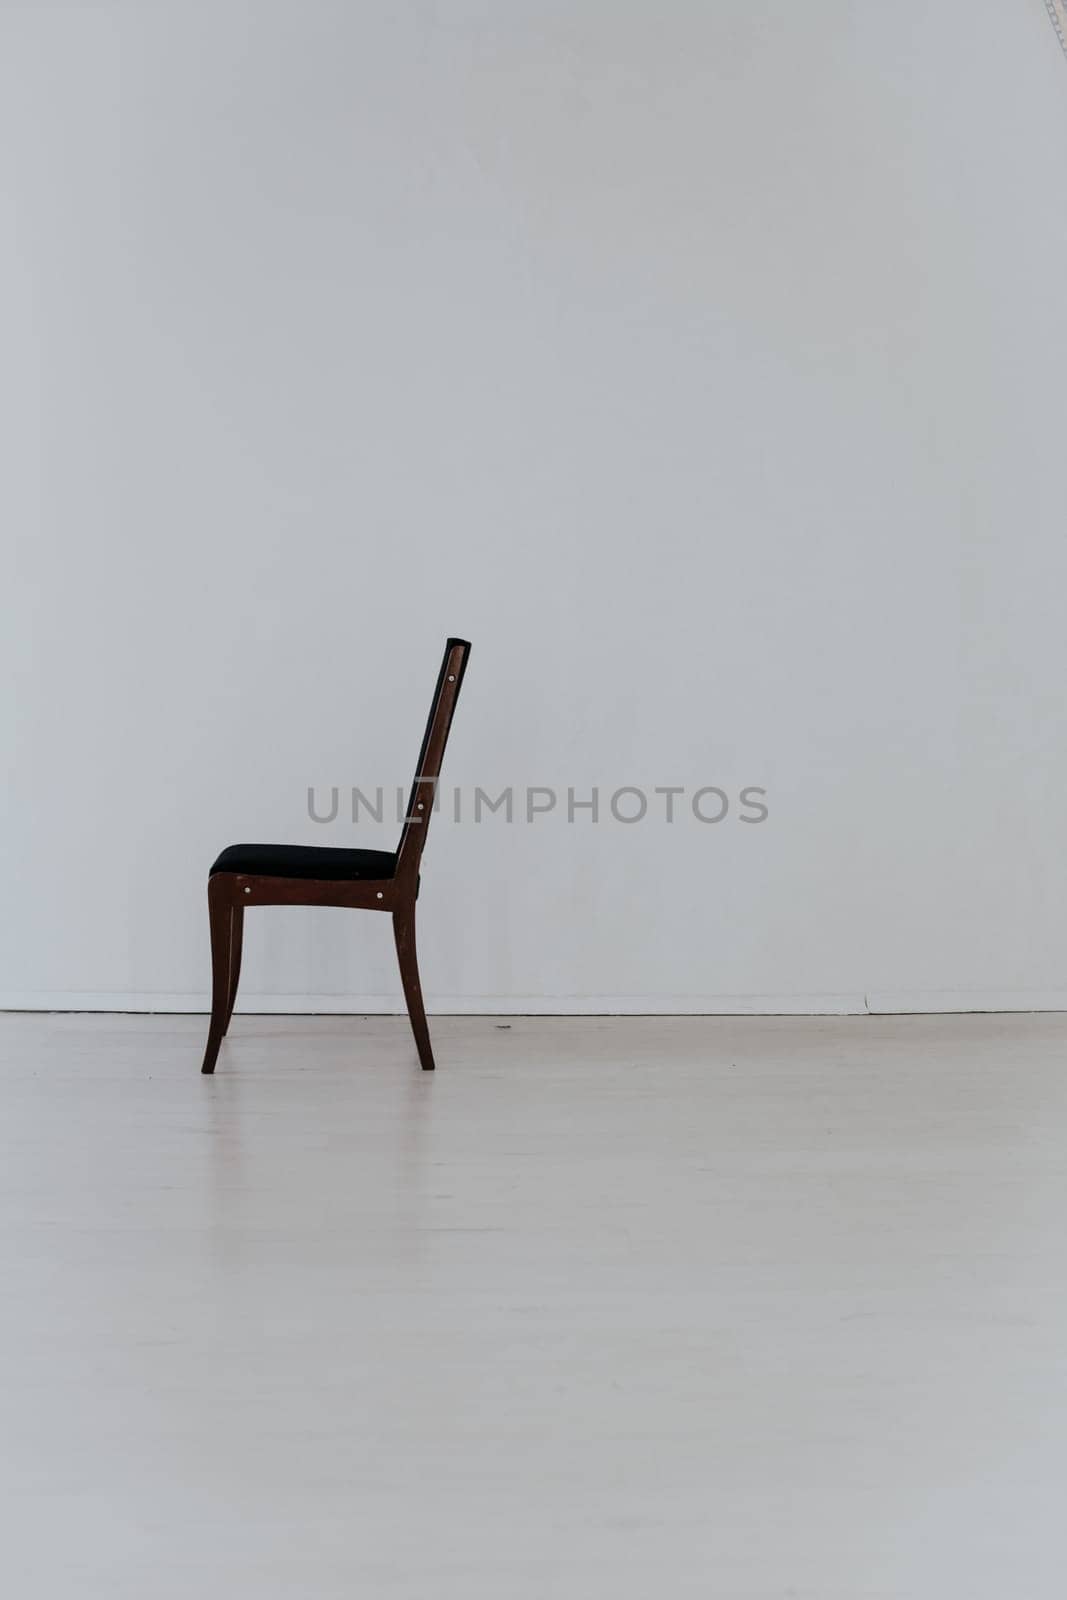 black chair stands alone in the white room by Simakov